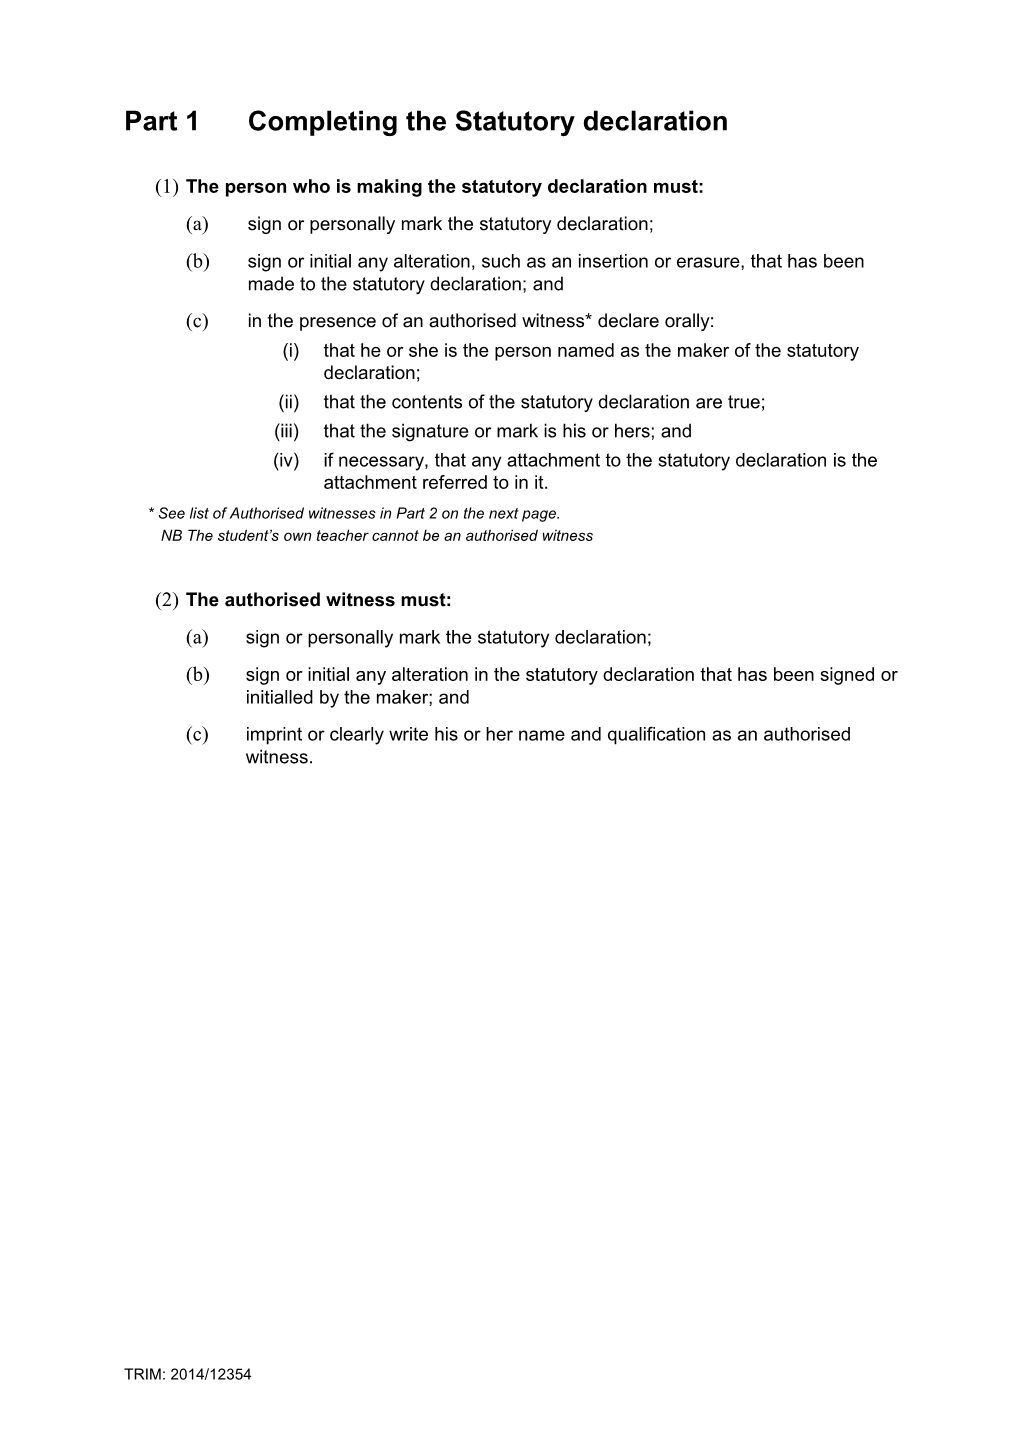 Part 1 Completing the Statutory Declaration